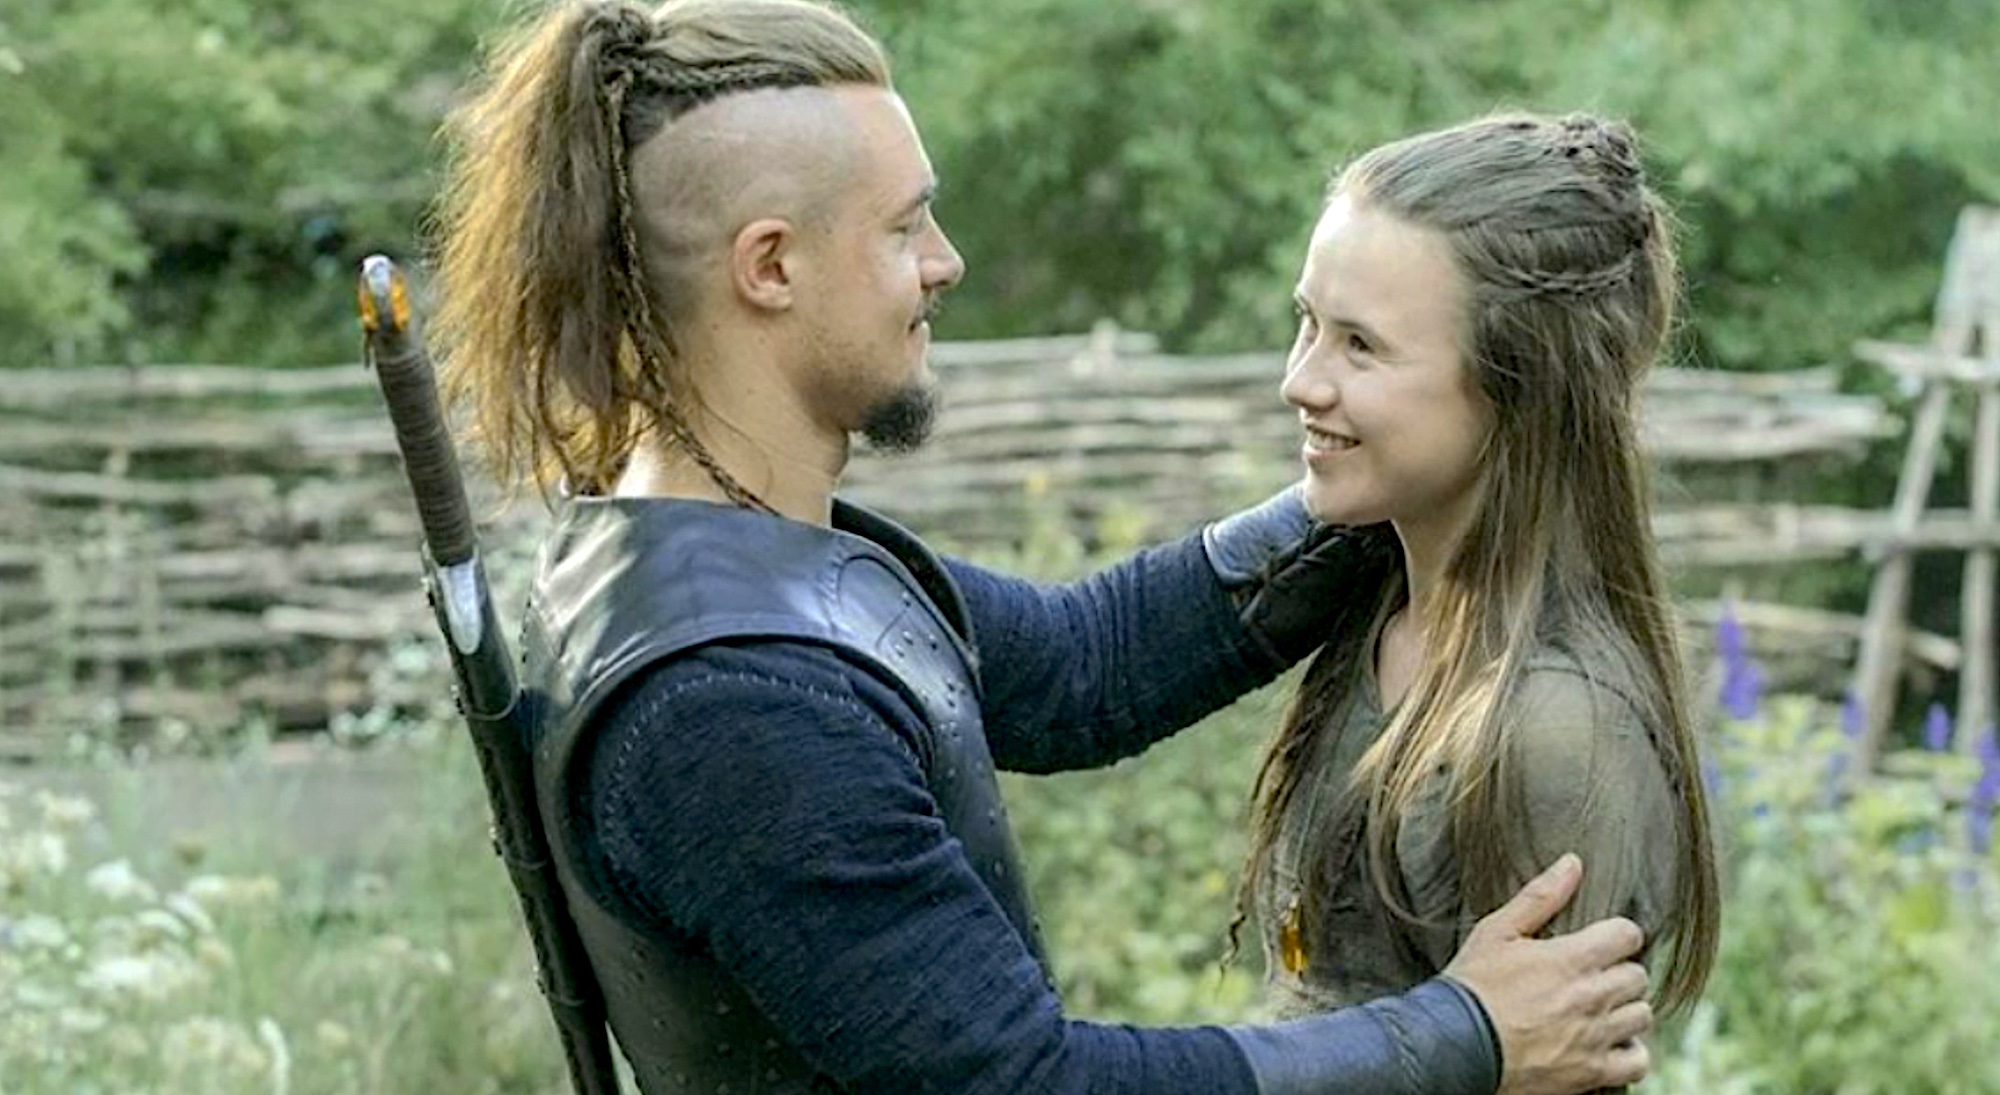 Will There Be a Season 6 of Netflix's 'The Last Kingdom'?